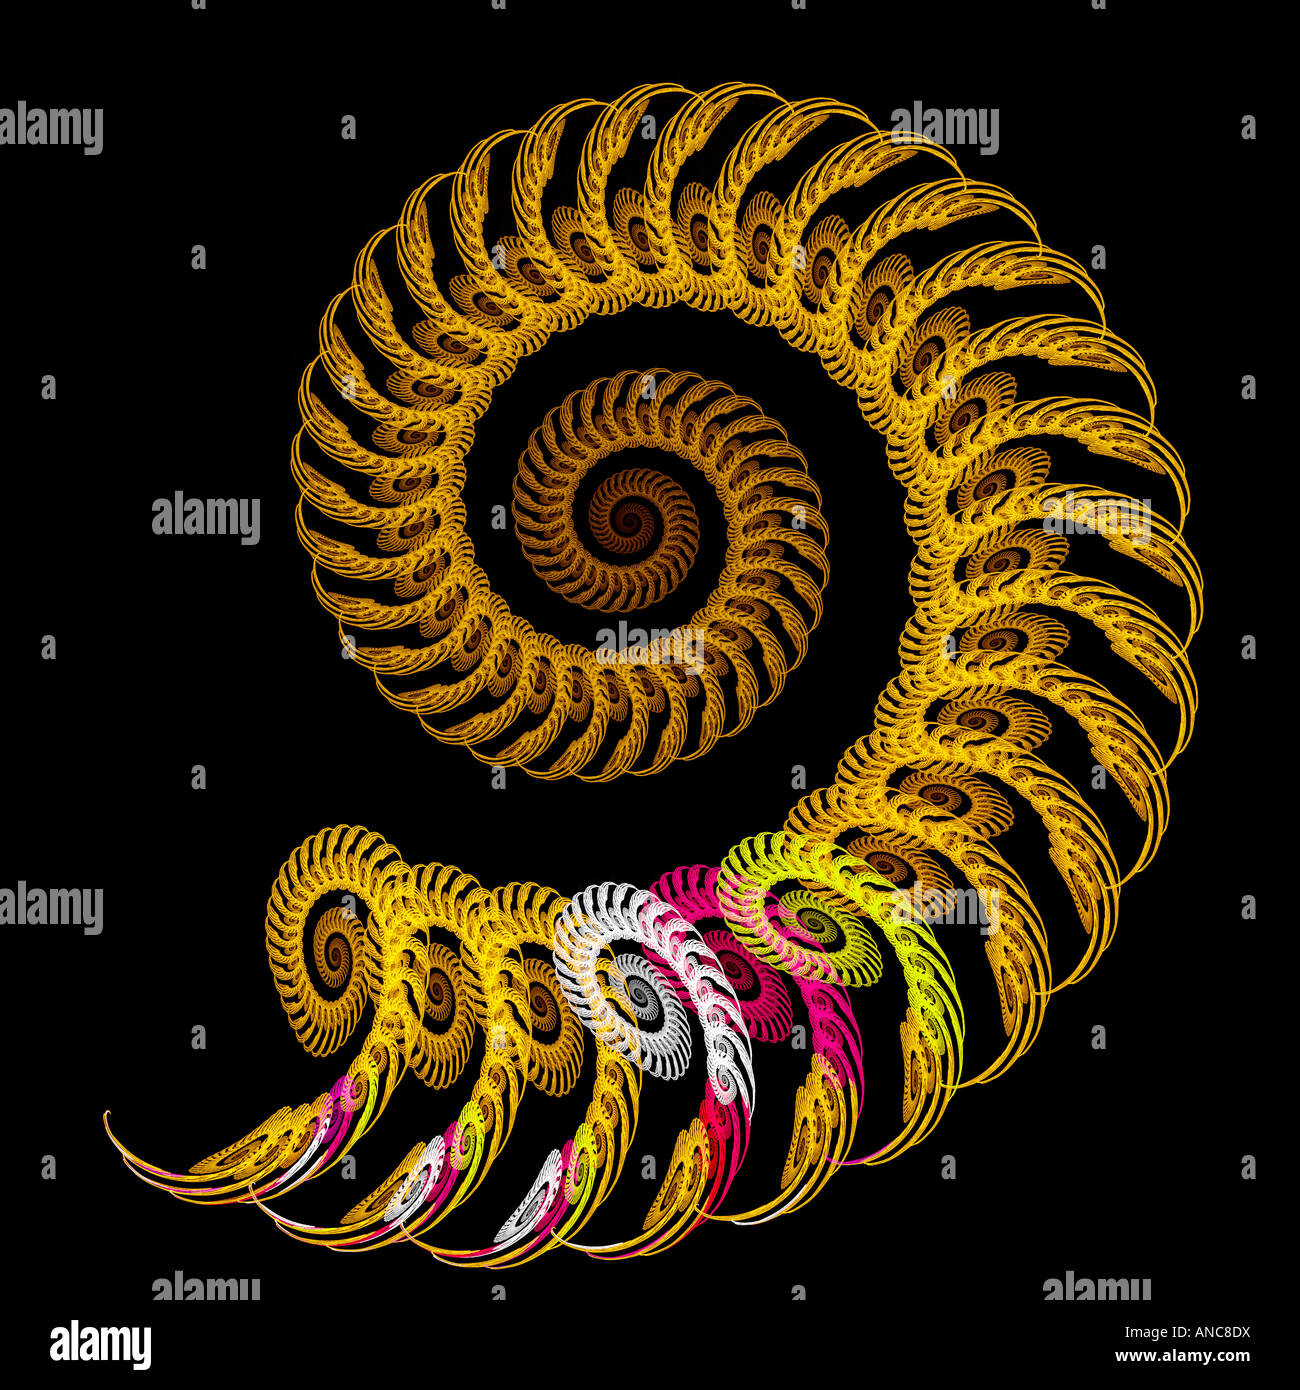 Abstract fractal image of a spiraling spiral Stock Photo